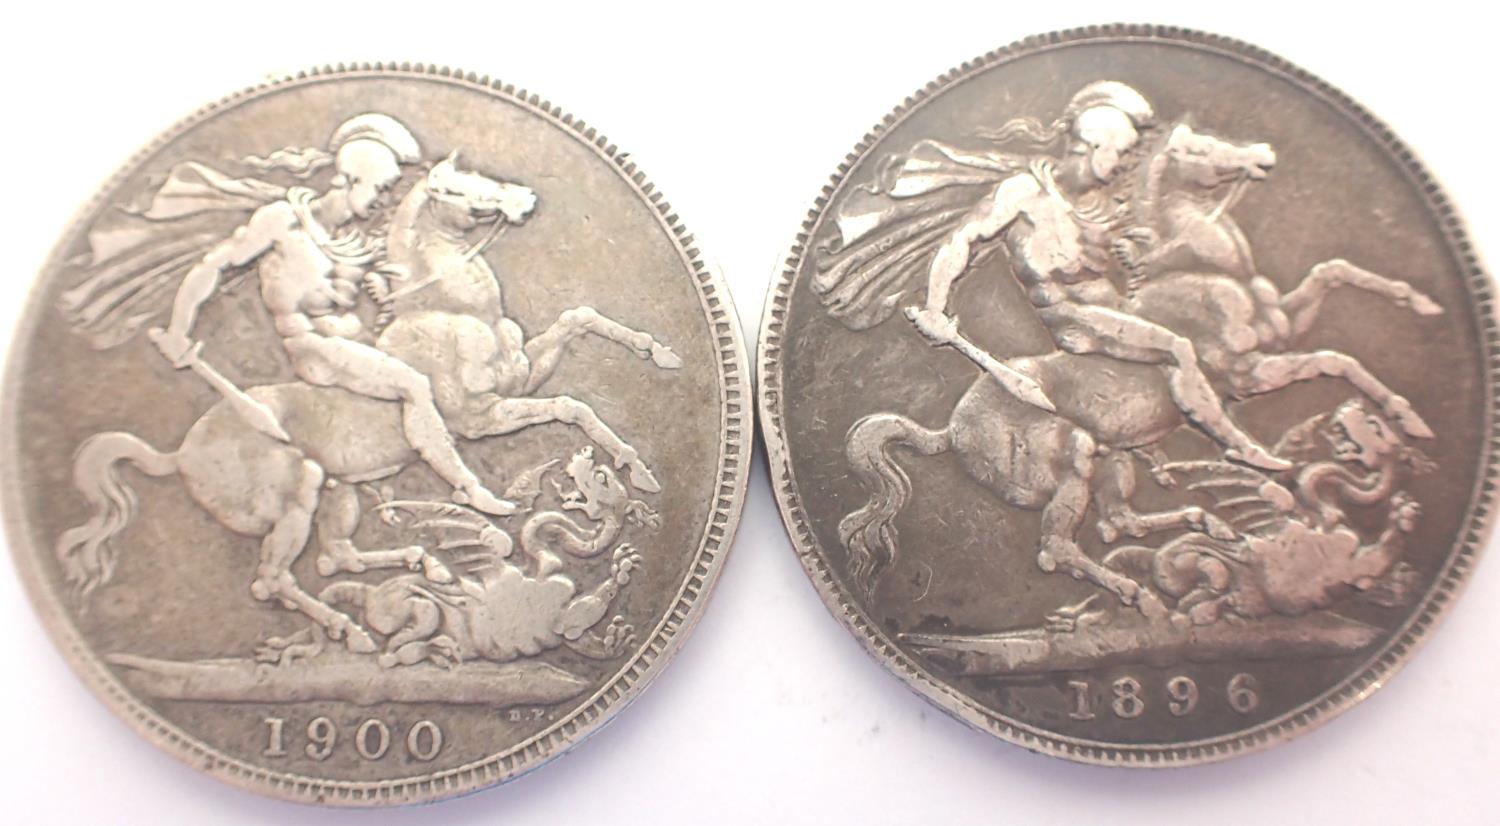 1896 and 1900 silver crowns of Queen Victoria (2). P&P Group 1 (£14+VAT for the first lot and £1+VAT